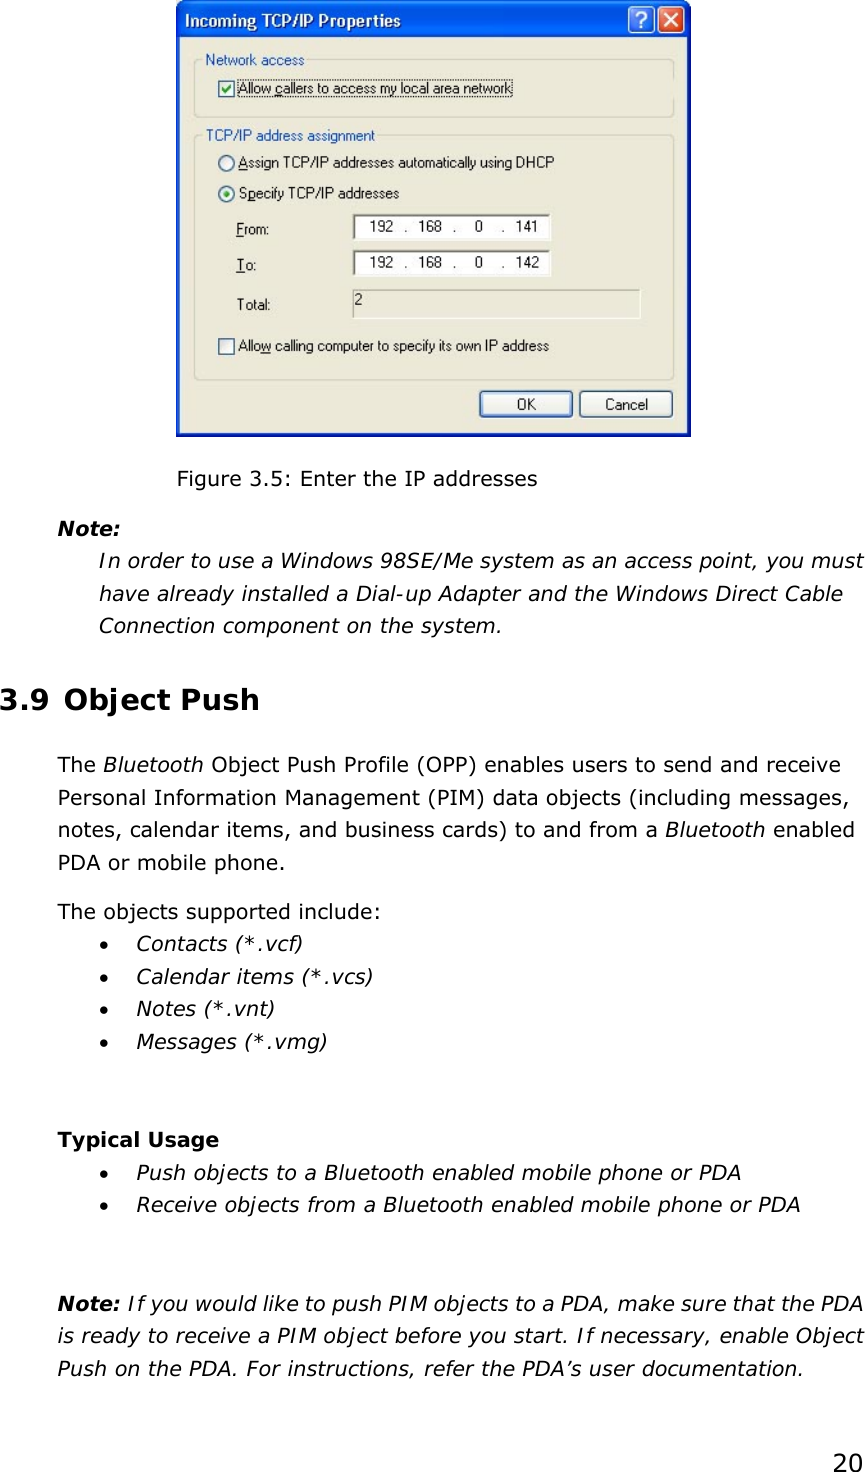 20  Figure 3.5: Enter the IP addresses Note: In order to use a Windows 98SE/Me system as an access point, you must have already installed a Dial-up Adapter and the Windows Direct Cable Connection component on the system.  3.9 Object Push The Bluetooth Object Push Profile (OPP) enables users to send and receive Personal Information Management (PIM) data objects (including messages, notes, calendar items, and business cards) to and from a Bluetooth enabled PDA or mobile phone. The objects supported include: • Contacts (*.vcf) • Calendar items (*.vcs) • Notes (*.vnt) • Messages (*.vmg)  Typical Usage • Push objects to a Bluetooth enabled mobile phone or PDA • Receive objects from a Bluetooth enabled mobile phone or PDA  Note: If you would like to push PIM objects to a PDA, make sure that the PDA is ready to receive a PIM object before you start. If necessary, enable Object Push on the PDA. For instructions, refer the PDA’s user documentation. 